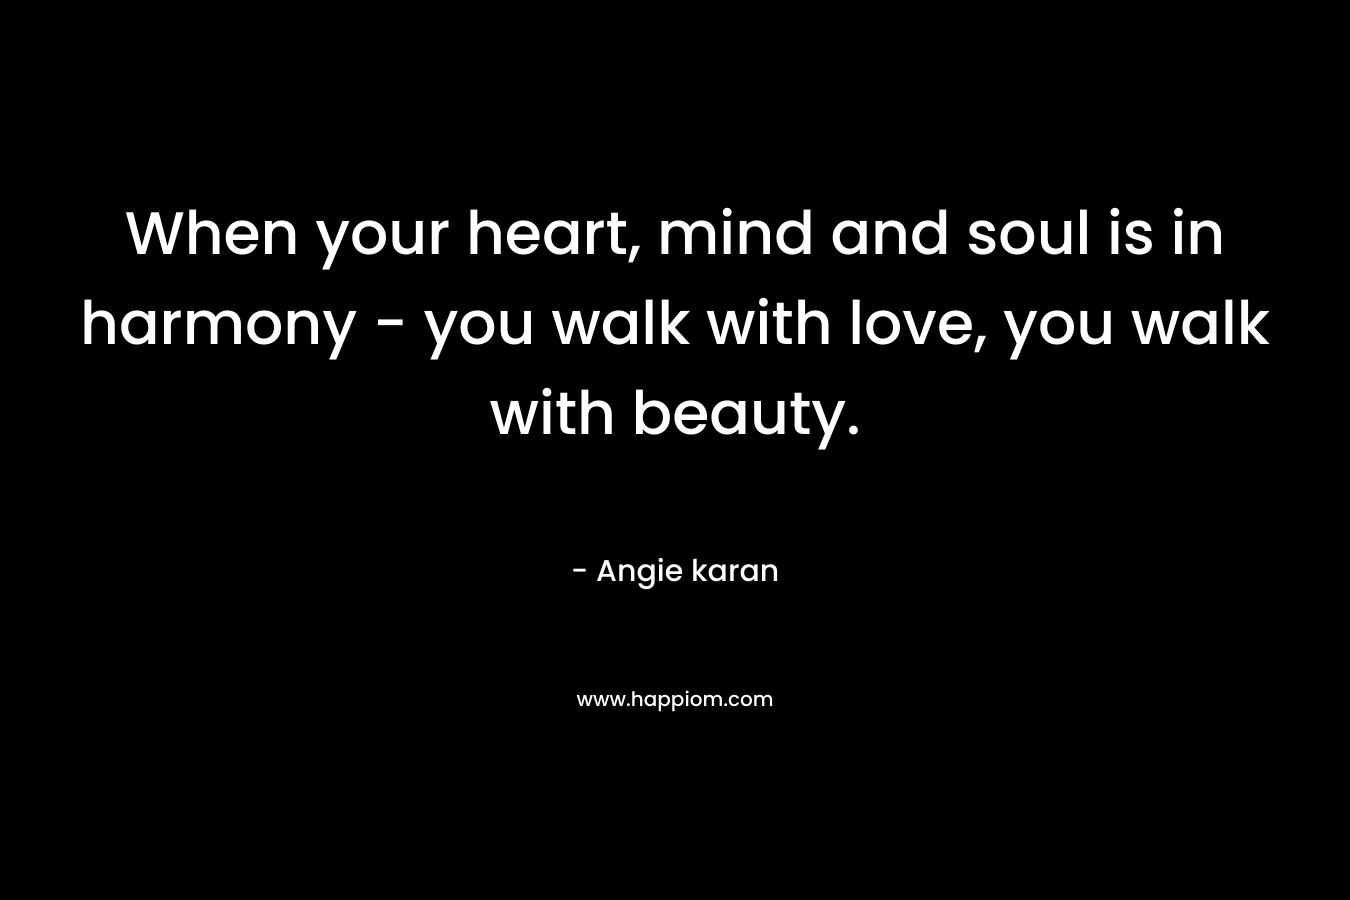 When your heart, mind and soul is in harmony - you walk with love, you walk with beauty.